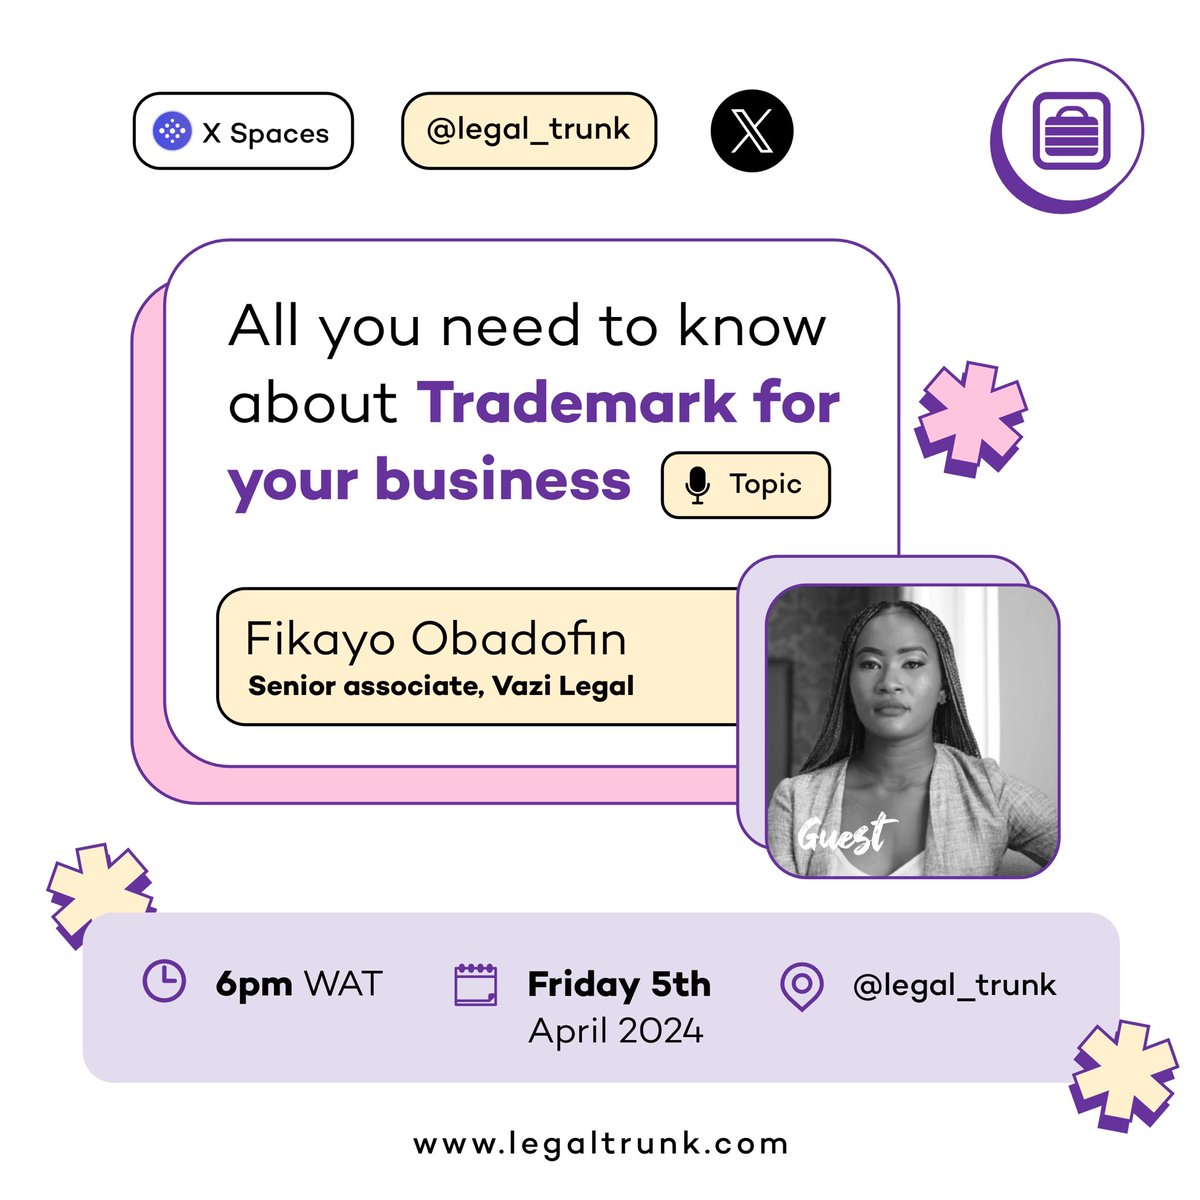 Happening tomorrow! 

Gentle reminder to join us tomorrow April 5, 2024 as we discuss the importance of trademark for your business. Click the link below to set a reminder if you haven’t. 👇🏾

x.com/i/spaces/1rdgl…

See you there! 
#LegalTrunk #Trademarkregistration